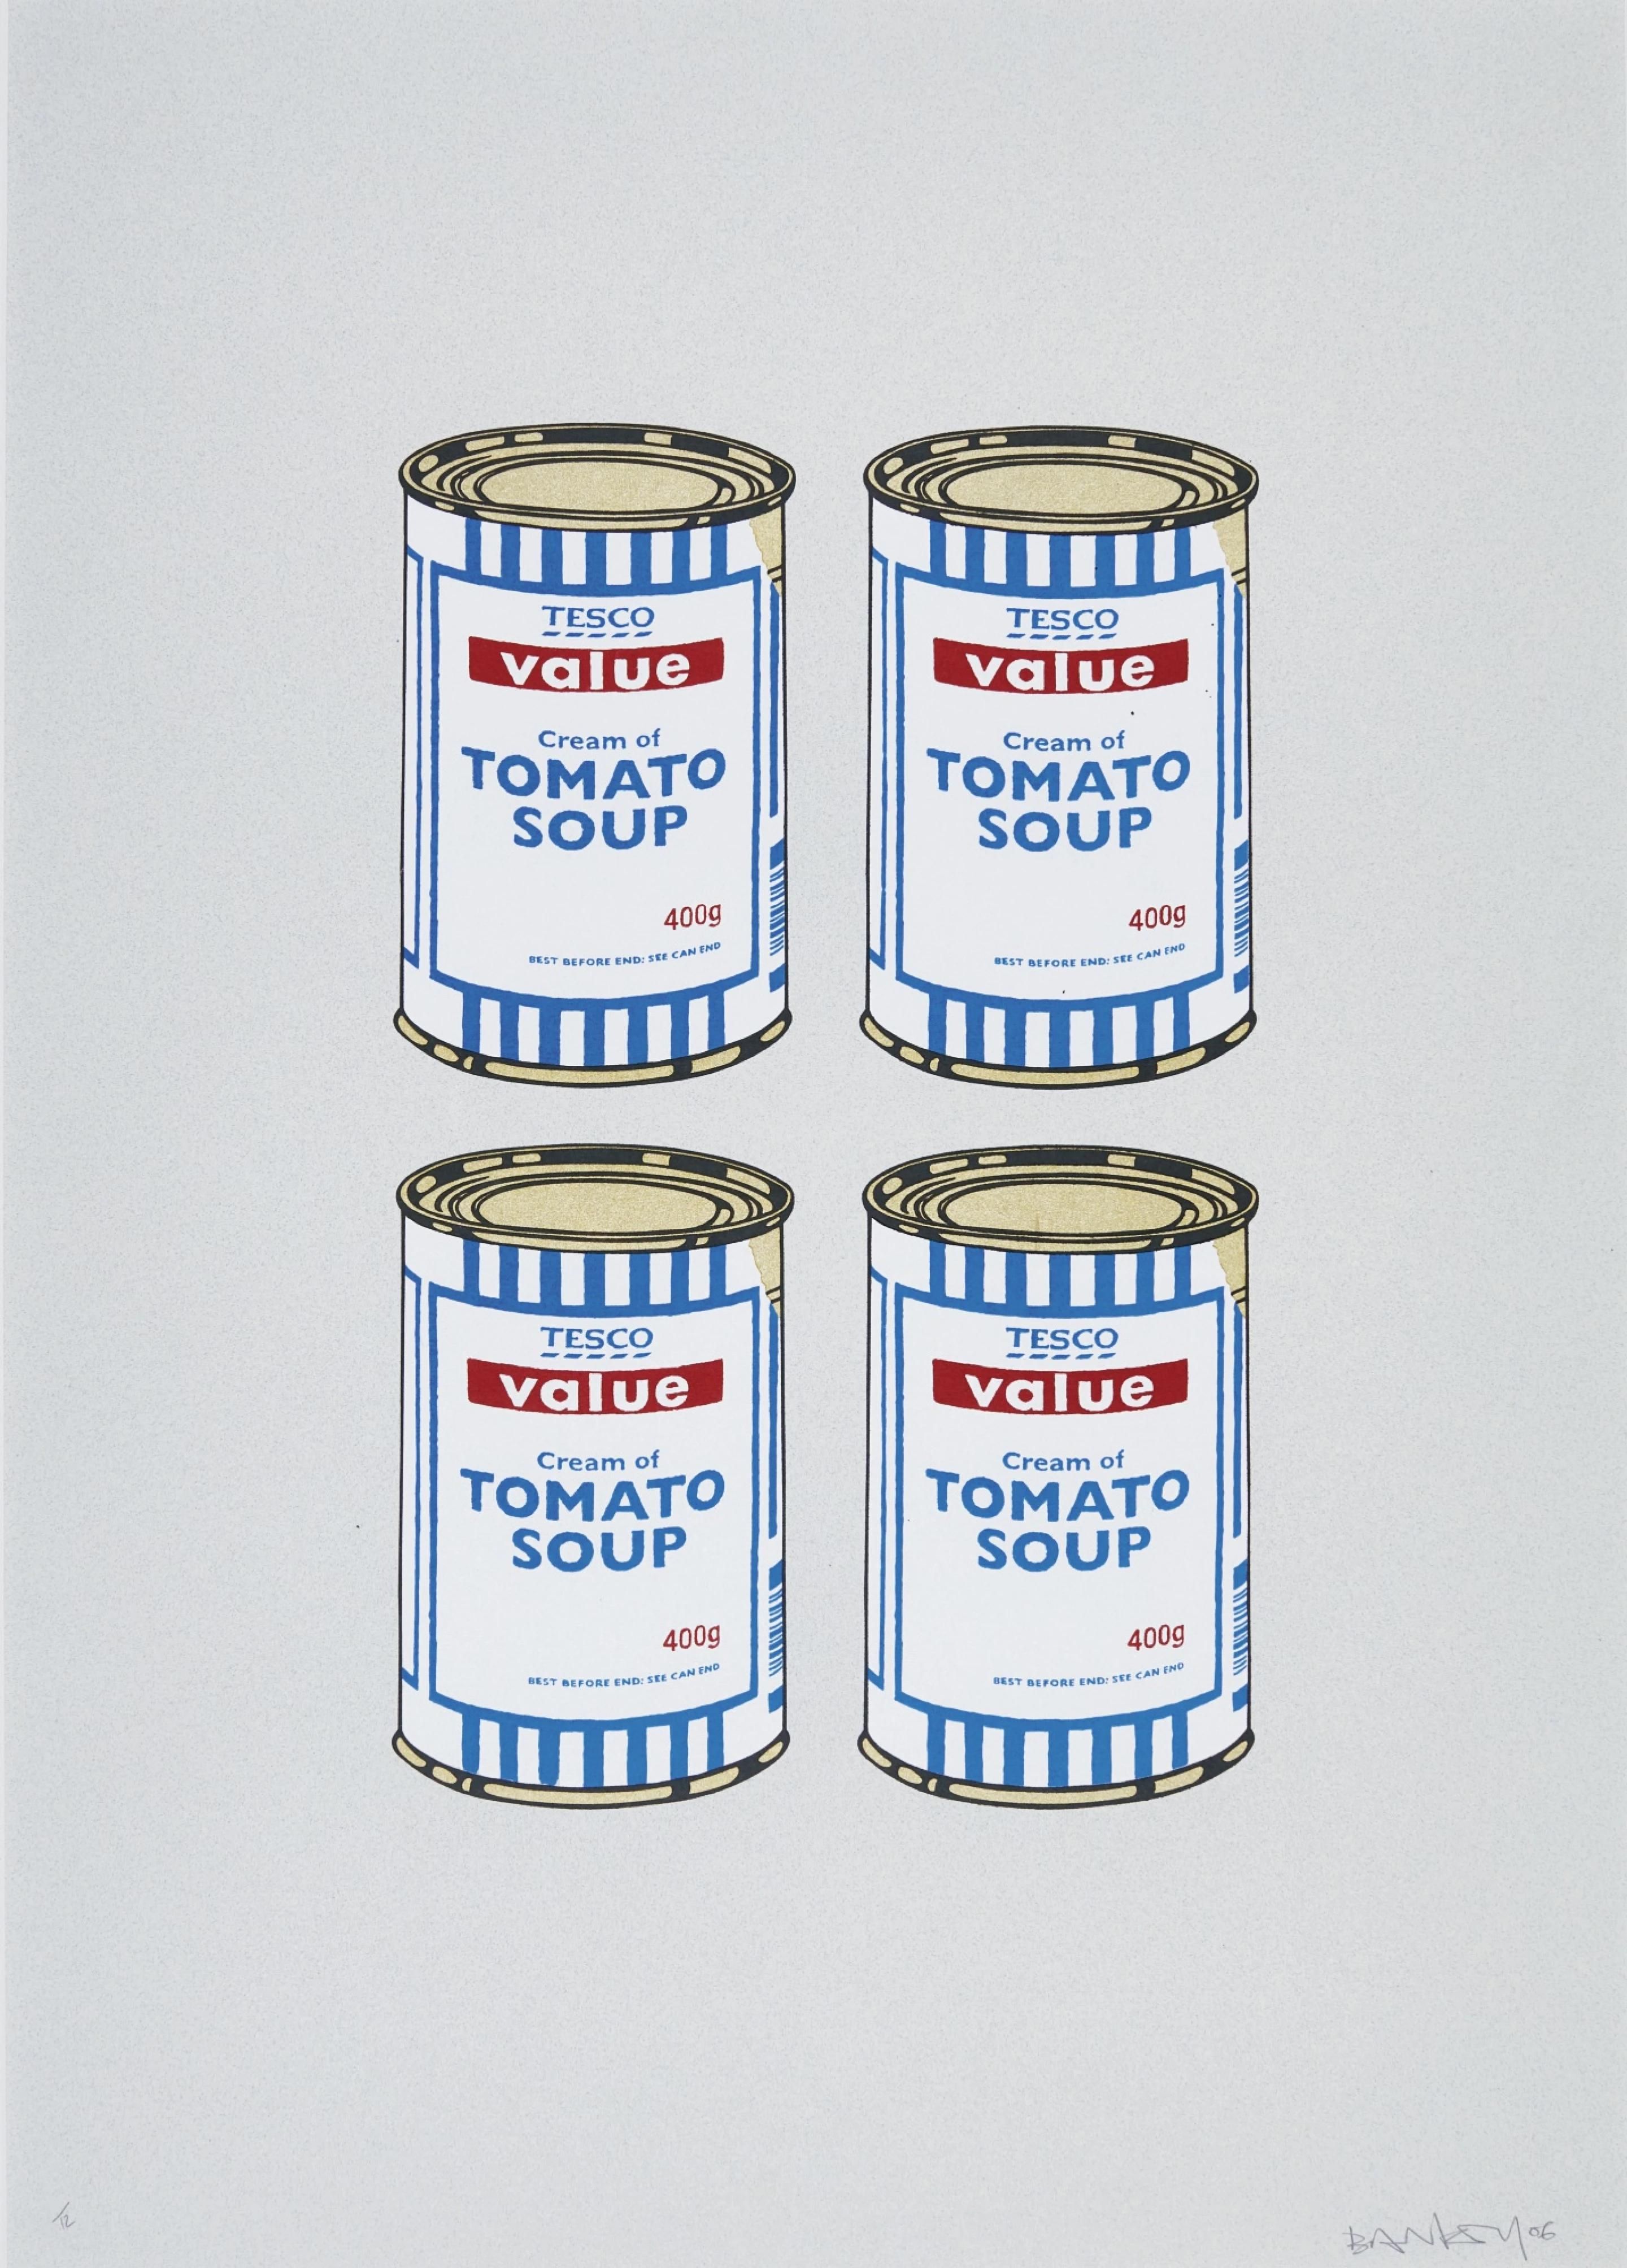 Soup Cans (Quad) by Banksy Background u0026 Meaning | MyArtBroker